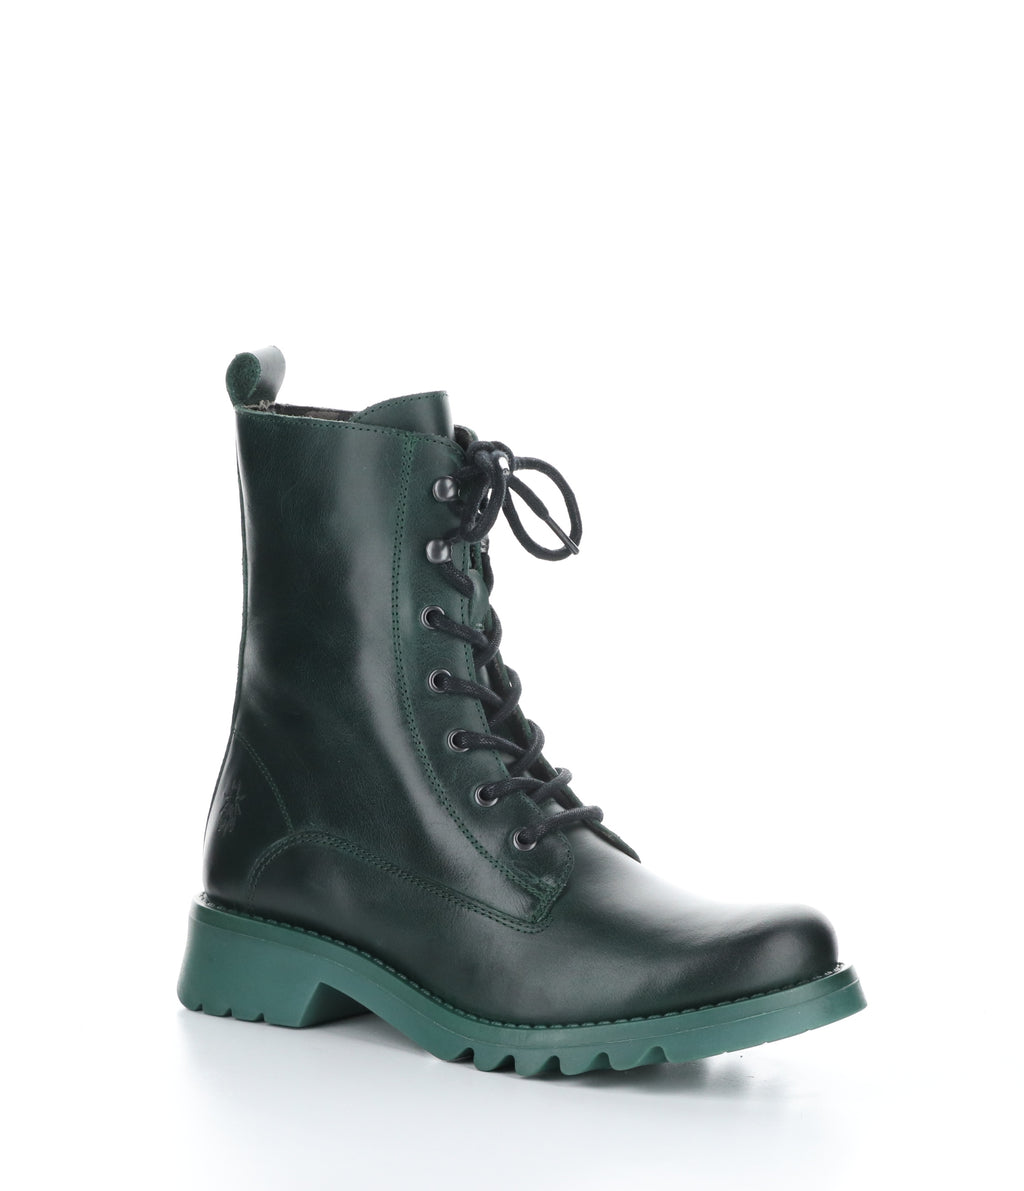 Fly London "Reid" Black Laceup/inside zip millitary boot with teal sole